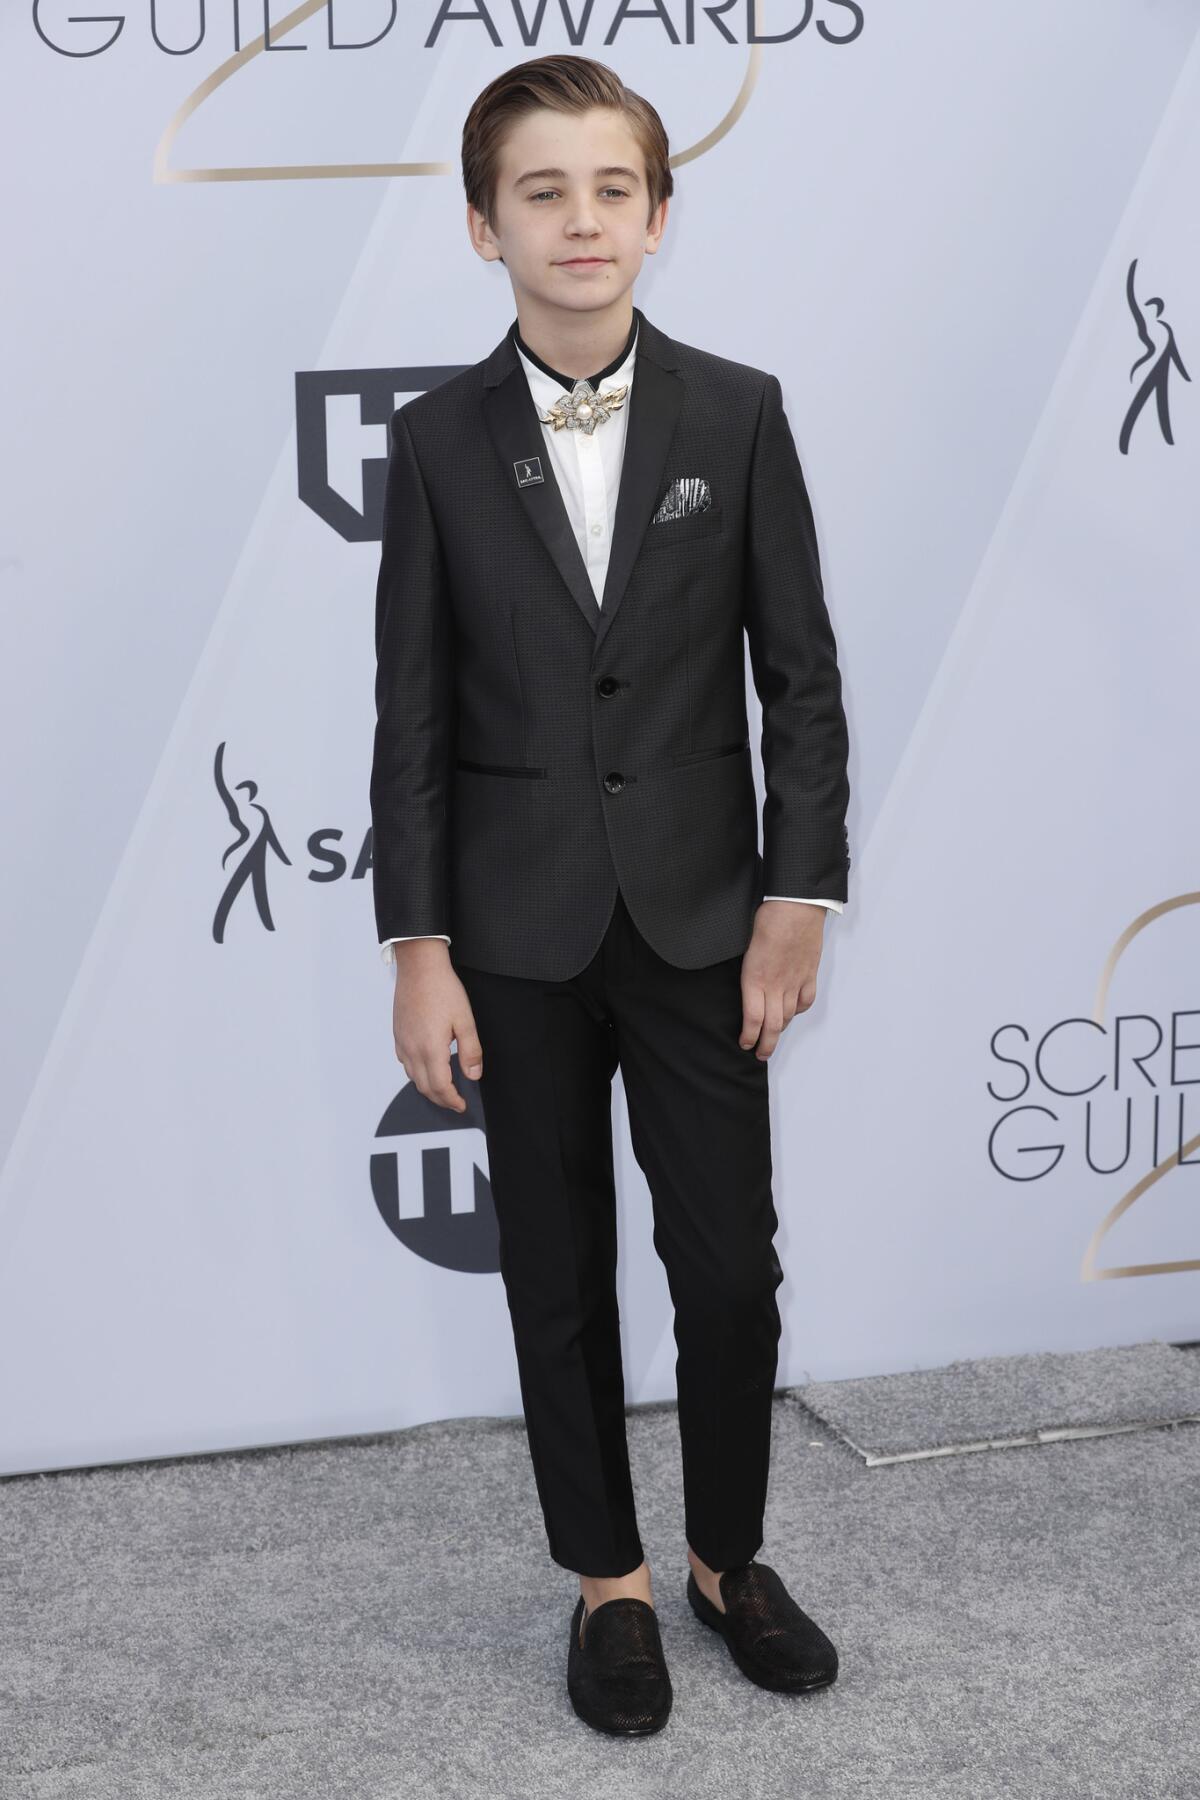 Parker Bates at the 25th Screen Actors Guild Awards on Sunday at the Los Angeles Shrine Auditorium.